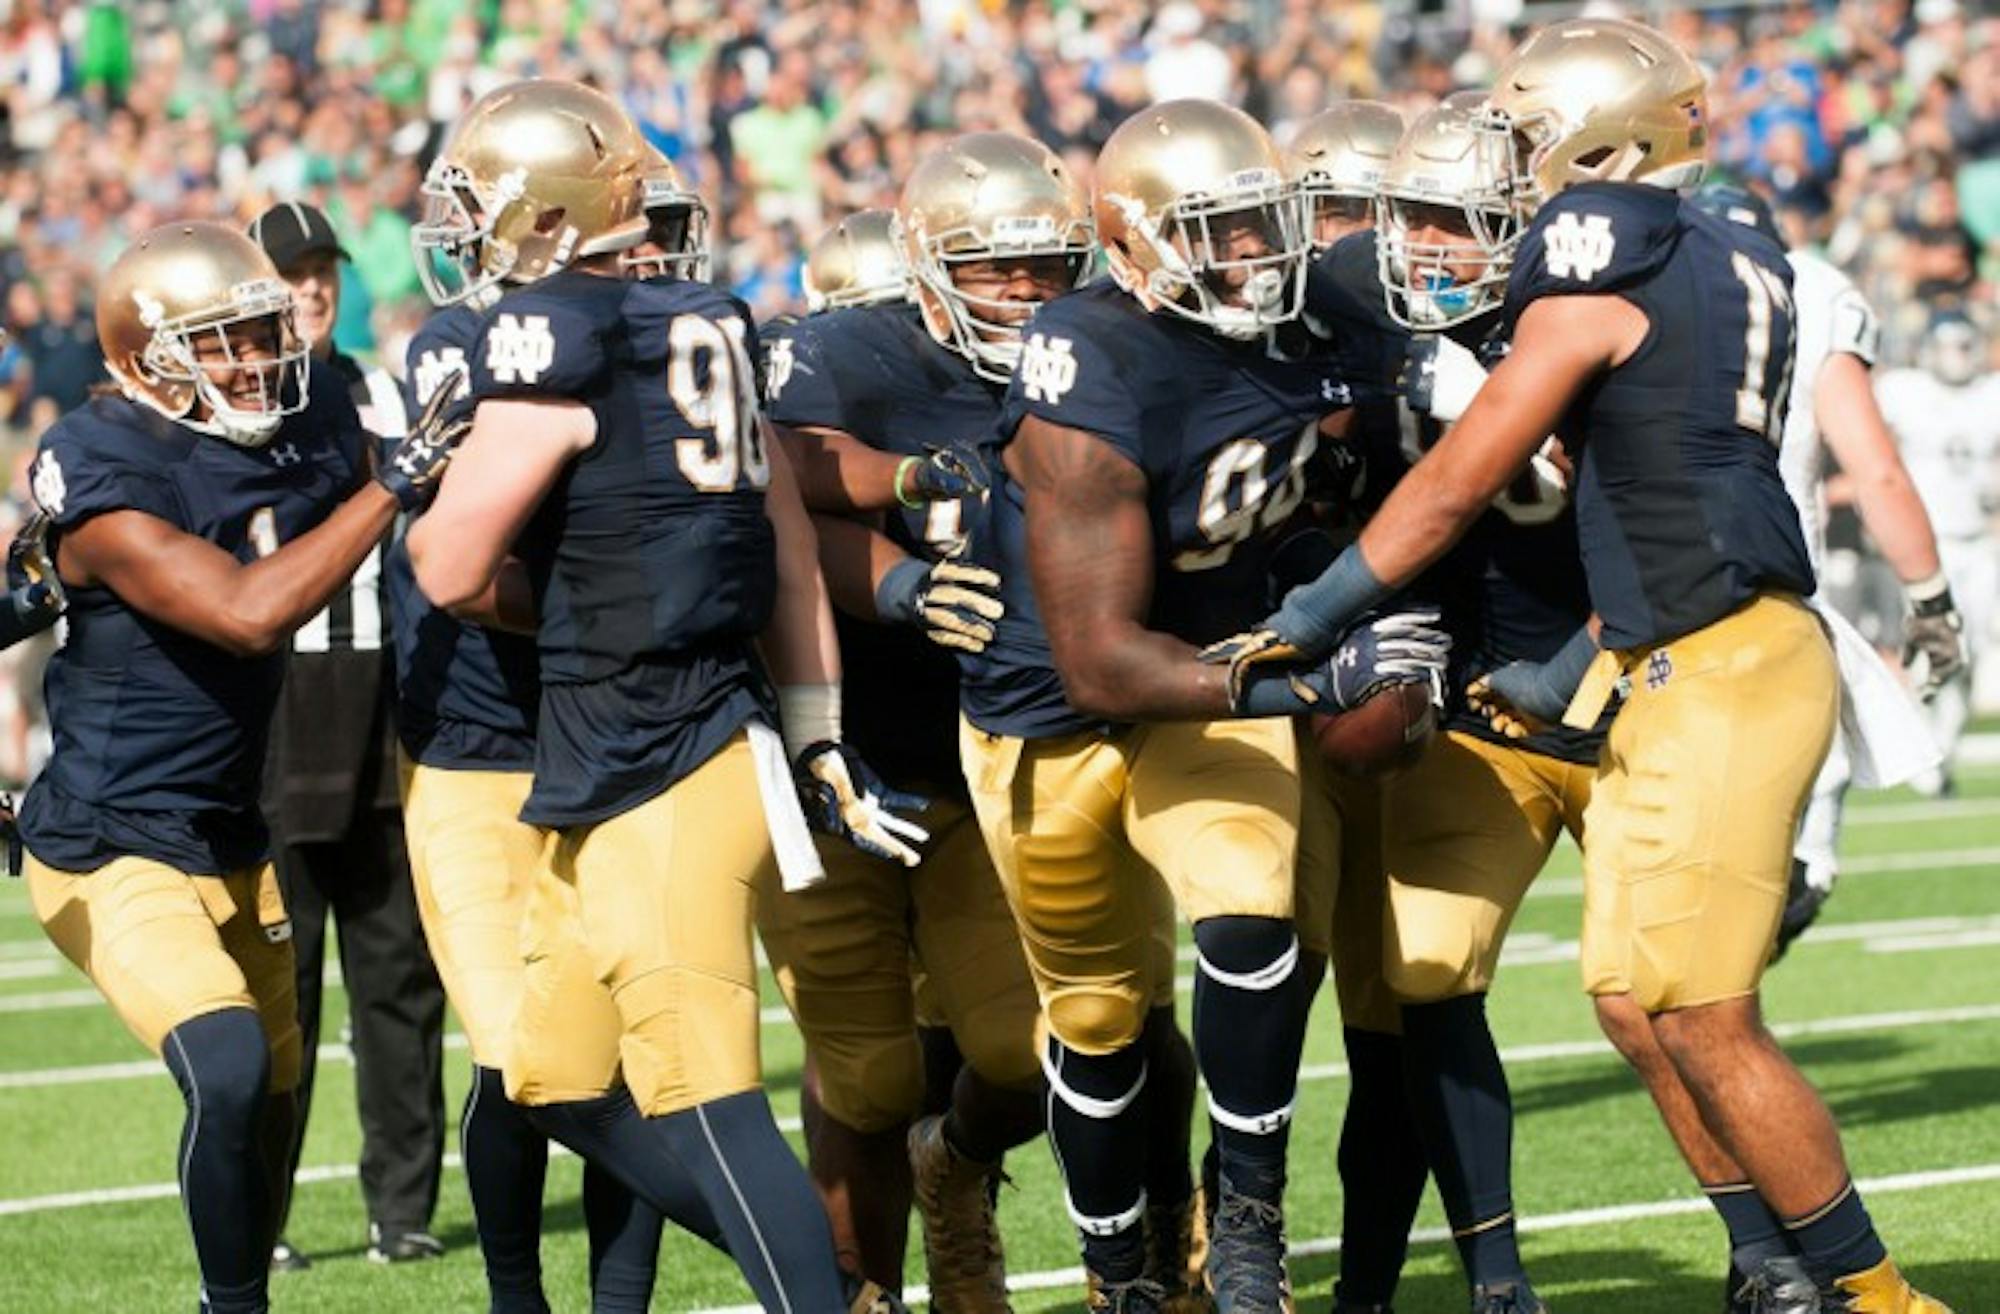 A gaggle of Notre Dame players celebrate an interception by senior defensive lineman Jarron Jones, center, in the second quarter of last weekend’s 39-10 victory over Nevada at Notre Dame Stadium.